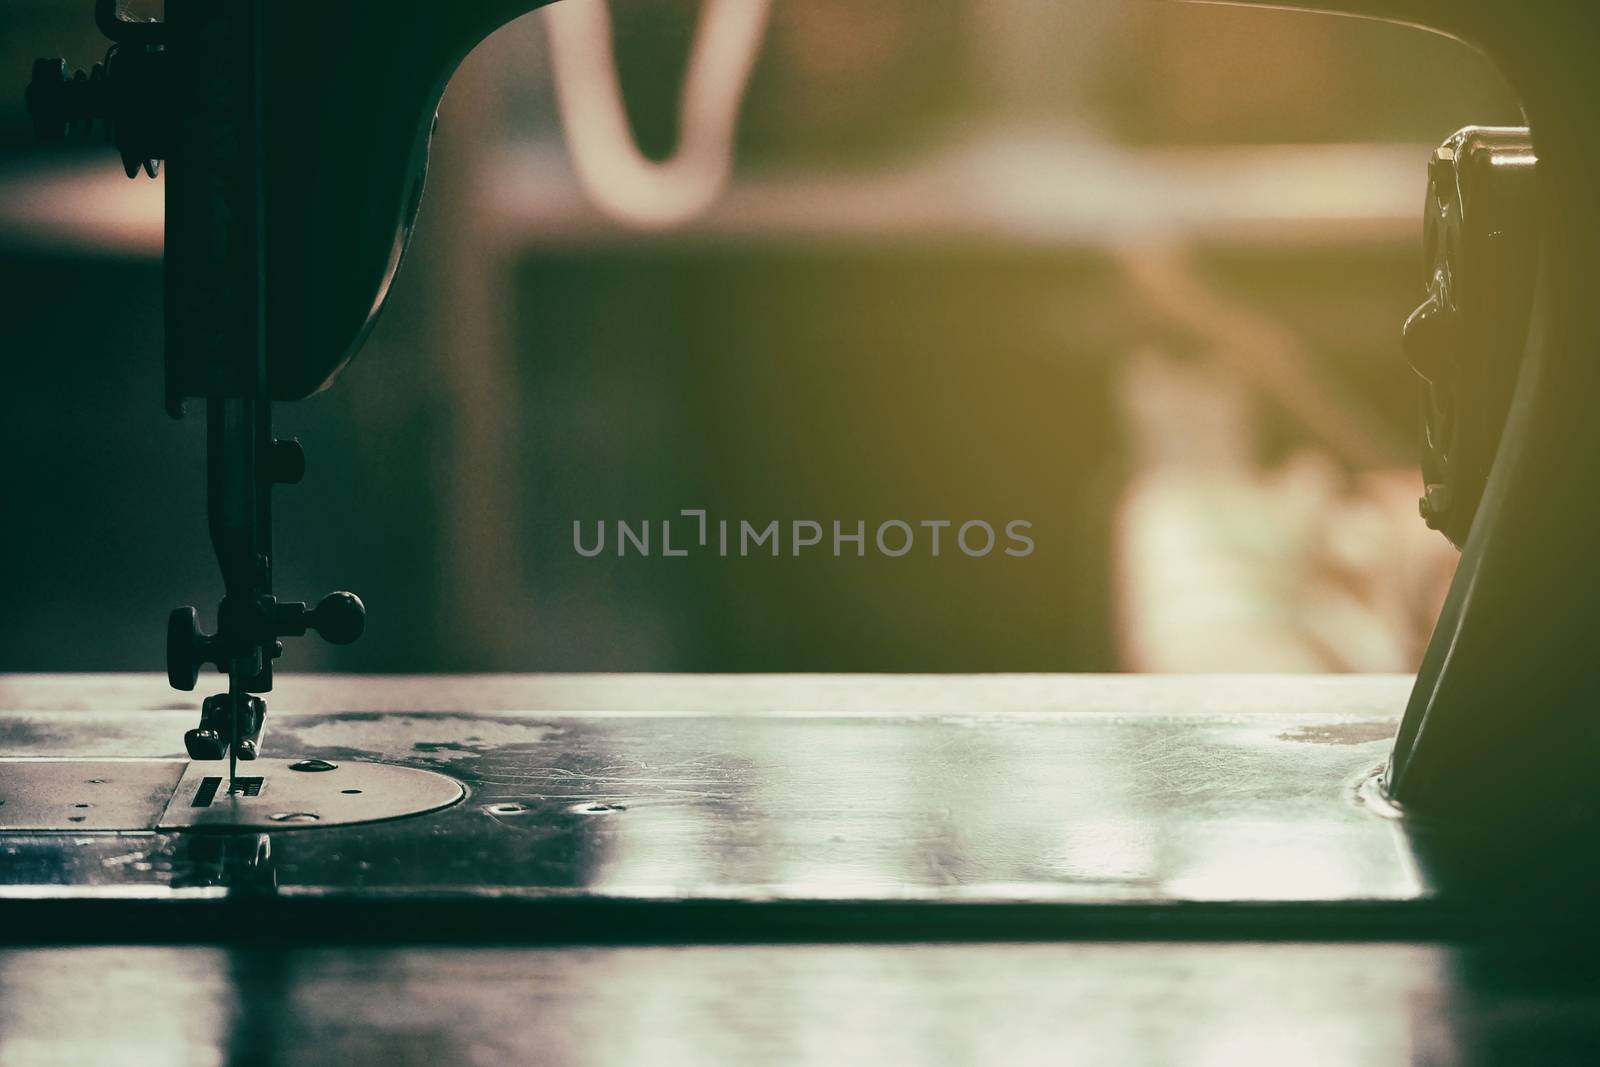 Ancient Sewing Machine with Light Leak. by mesamong